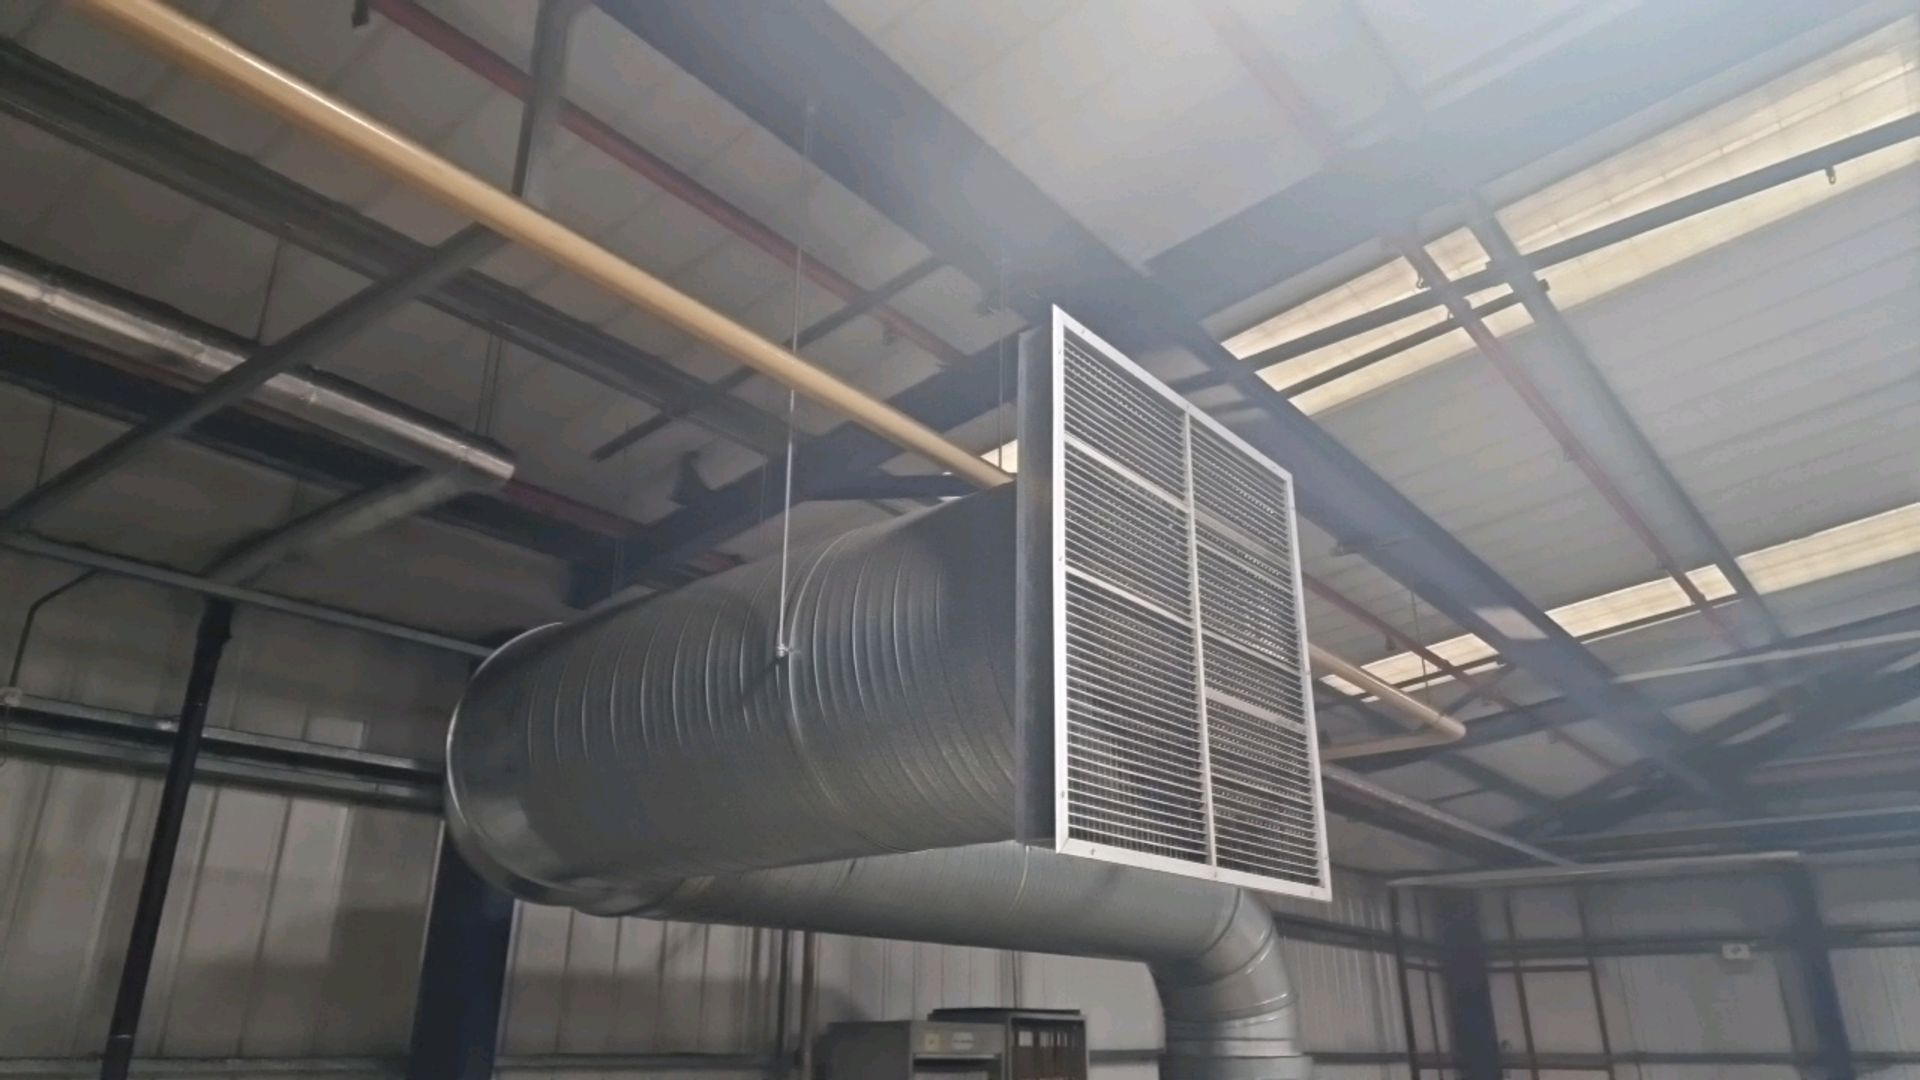 Powrmatic Industrial Heating Unit - Image 14 of 14